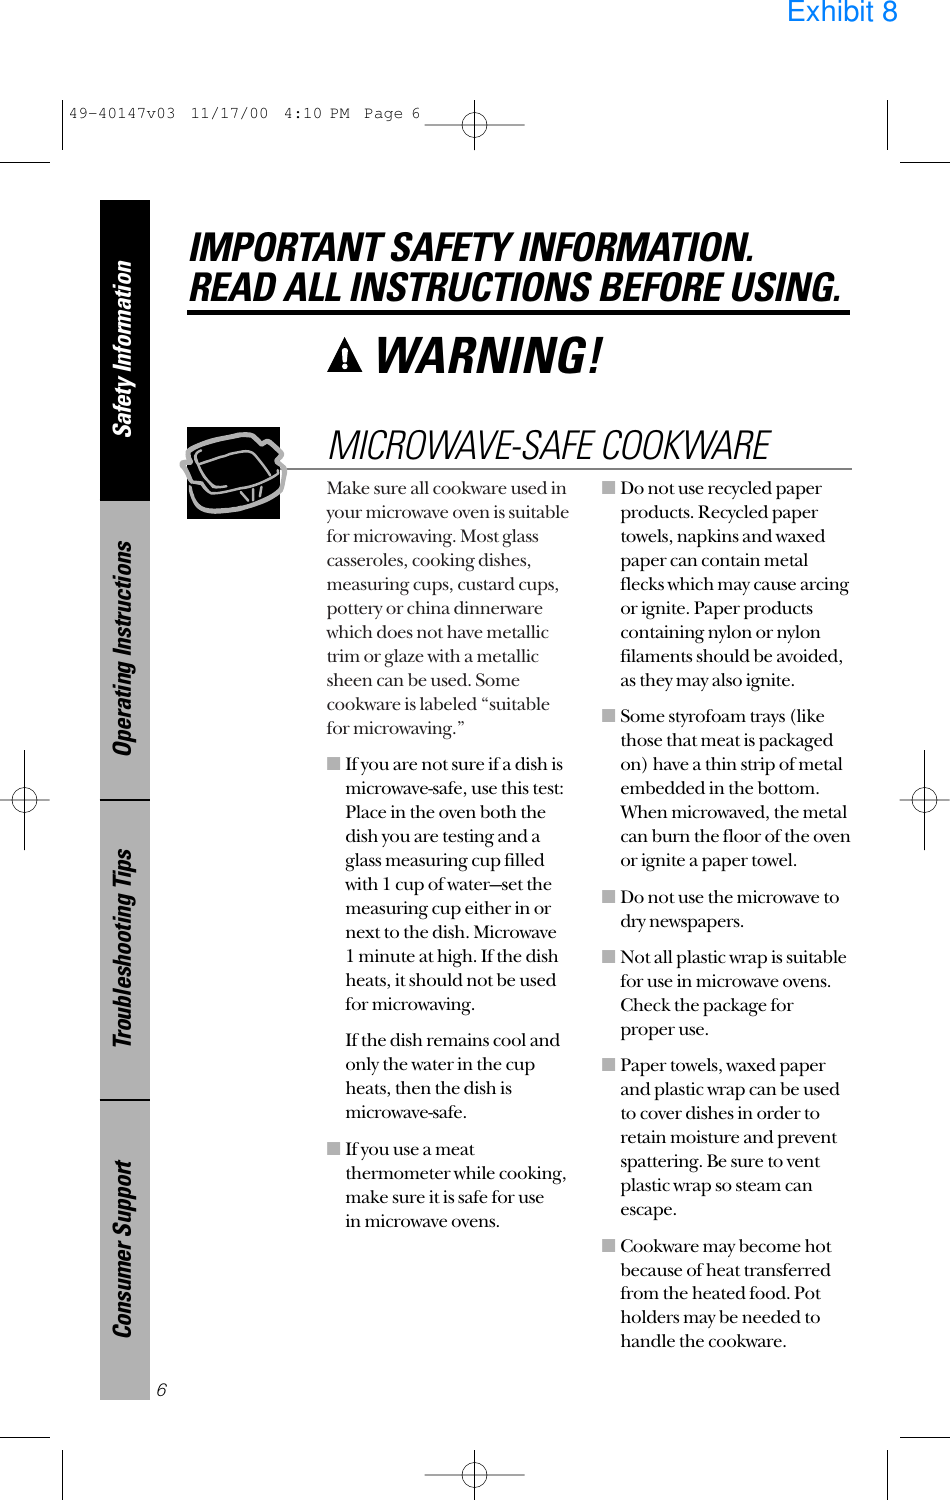 Make sure all cookware used inyour microwave oven is suitablefor microwaving. Most glasscasseroles, cooking dishes,measuring cups, custard cups,pottery or china dinnerwarewhich does not have metallictrim or glaze with a metallicsheen can be used. Somecookware is labeled “suitablefor microwaving.”■If you are not sure if a dish ismicrowave-safe, use this test:Place in the oven both thedish you are testing and aglass measuring cup filledwith 1 cup of water—set themeasuring cup either in ornext to the dish. Microwave 1 minute at high. If the dishheats, it should not be usedfor microwaving. If the dish remains cool andonly the water in the cupheats, then the dish ismicrowave-safe.■If you use a meatthermometer while cooking,make sure it is safe for use in microwave ovens.■Do not use recycled paperproducts. Recycled papertowels, napkins and waxedpaper can contain metalflecks which may cause arcingor ignite. Paper productscontaining nylon or nylonfilaments should be avoided,as they may also ignite. ■Some styrofoam trays (likethose that meat is packagedon) have a thin strip of metalembedded in the bottom.When microwaved, the metalcan burn the floor of the ovenor ignite a paper towel.■Do not use the microwave todry newspapers.■Not all plastic wrap is suitablefor use in microwave ovens.Check the package forproper use.■Paper towels, waxed paperand plastic wrap can be usedto cover dishes in order toretain moisture and preventspattering. Be sure to ventplastic wrap so steam canescape.■Cookware may become hotbecause of heat transferredfrom the heated food. Potholders may be needed tohandle the cookware.MICROWAVE-SAFE COOKWARESafety InformationOperating InstructionsTroubleshooting TipsConsumer SupportIMPORTANT SAFETY INFORMATION.READ ALL INSTRUCTIONS BEFORE USING.6WARNING! 49-40147v03  11/17/00  4:10 PM  Page 6Exhibit 8